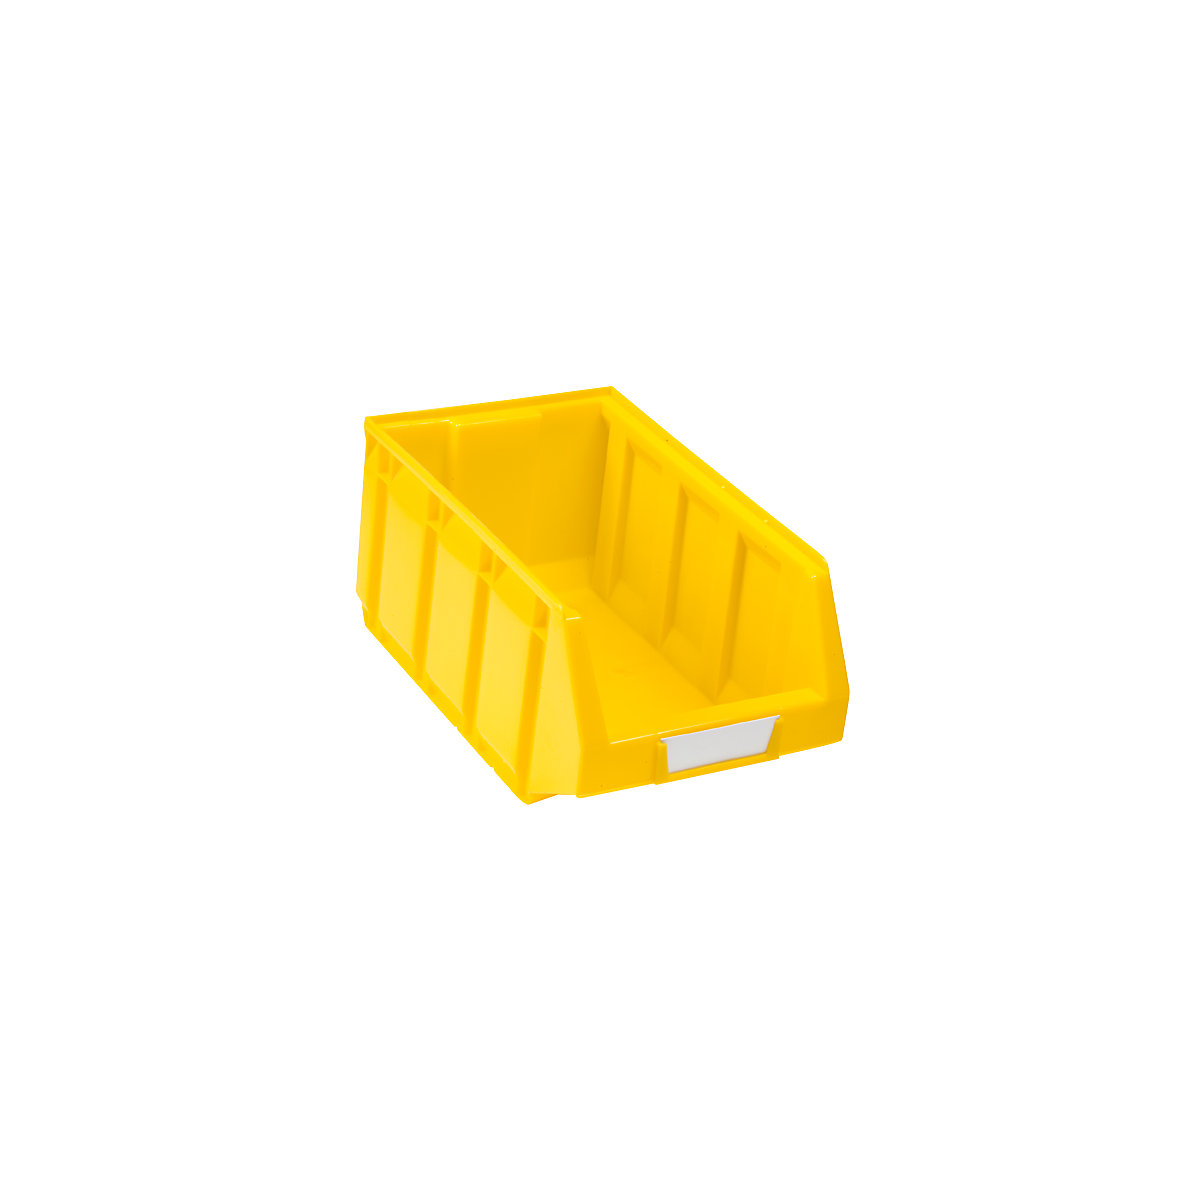 Open fronted storage bin made of polyethylene, LxWxH 345 x 205 x 164 mm, yellow, pack of 24-6